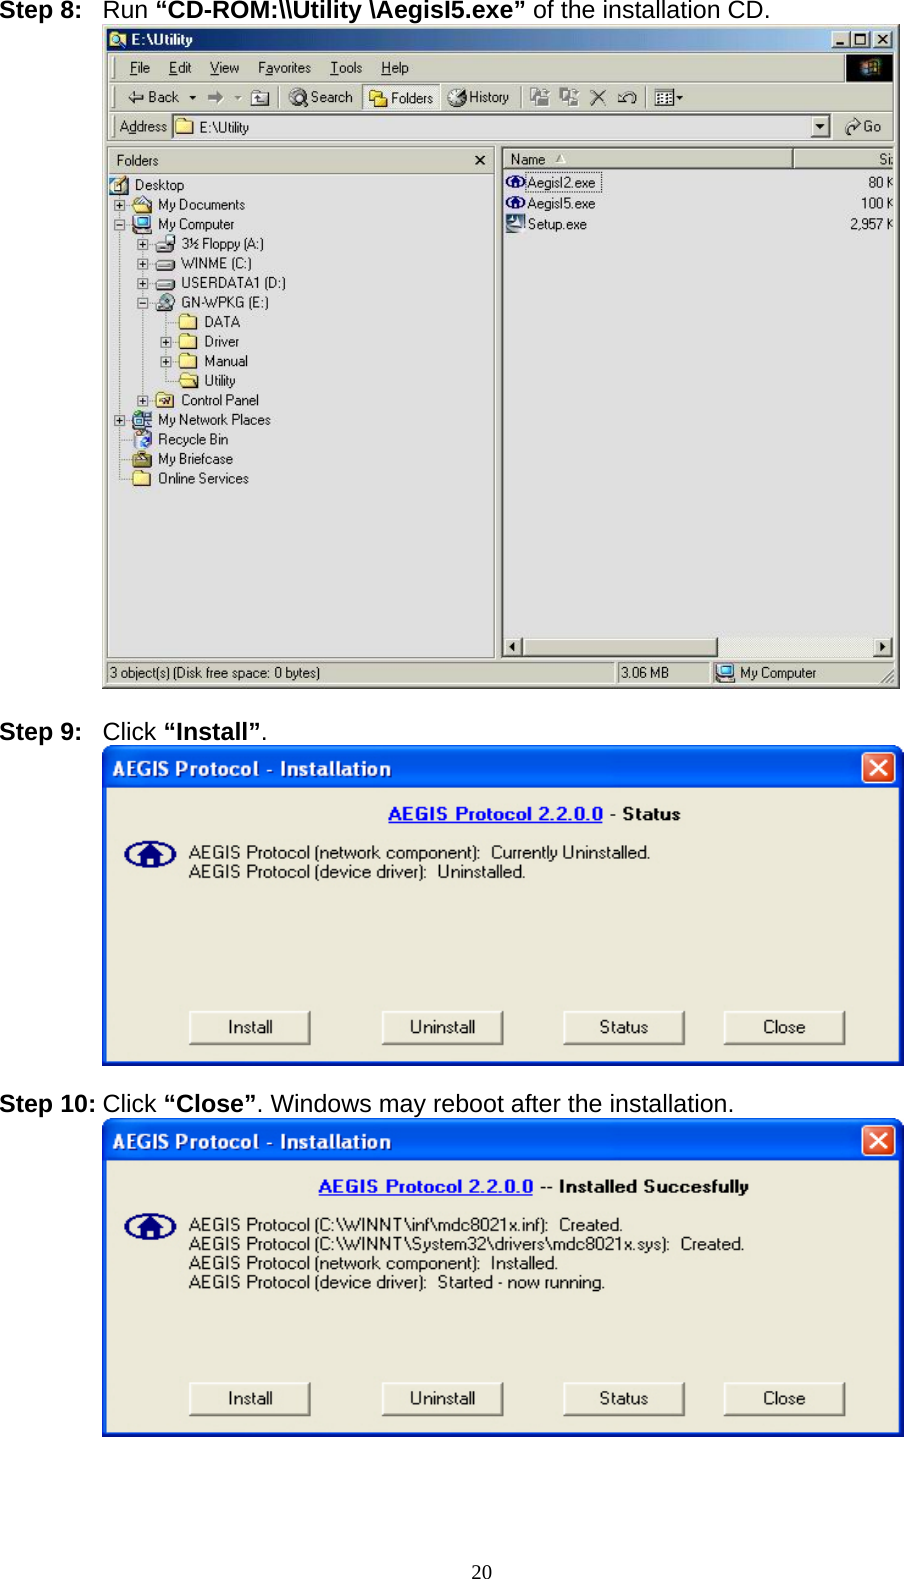 20   Step 8: Run “CD-ROM:\\Utility \AegisI5.exe” of the installation CD.   Step 9:  Click “Install”.   Step 10: Click “Close”. Windows may reboot after the installation.   